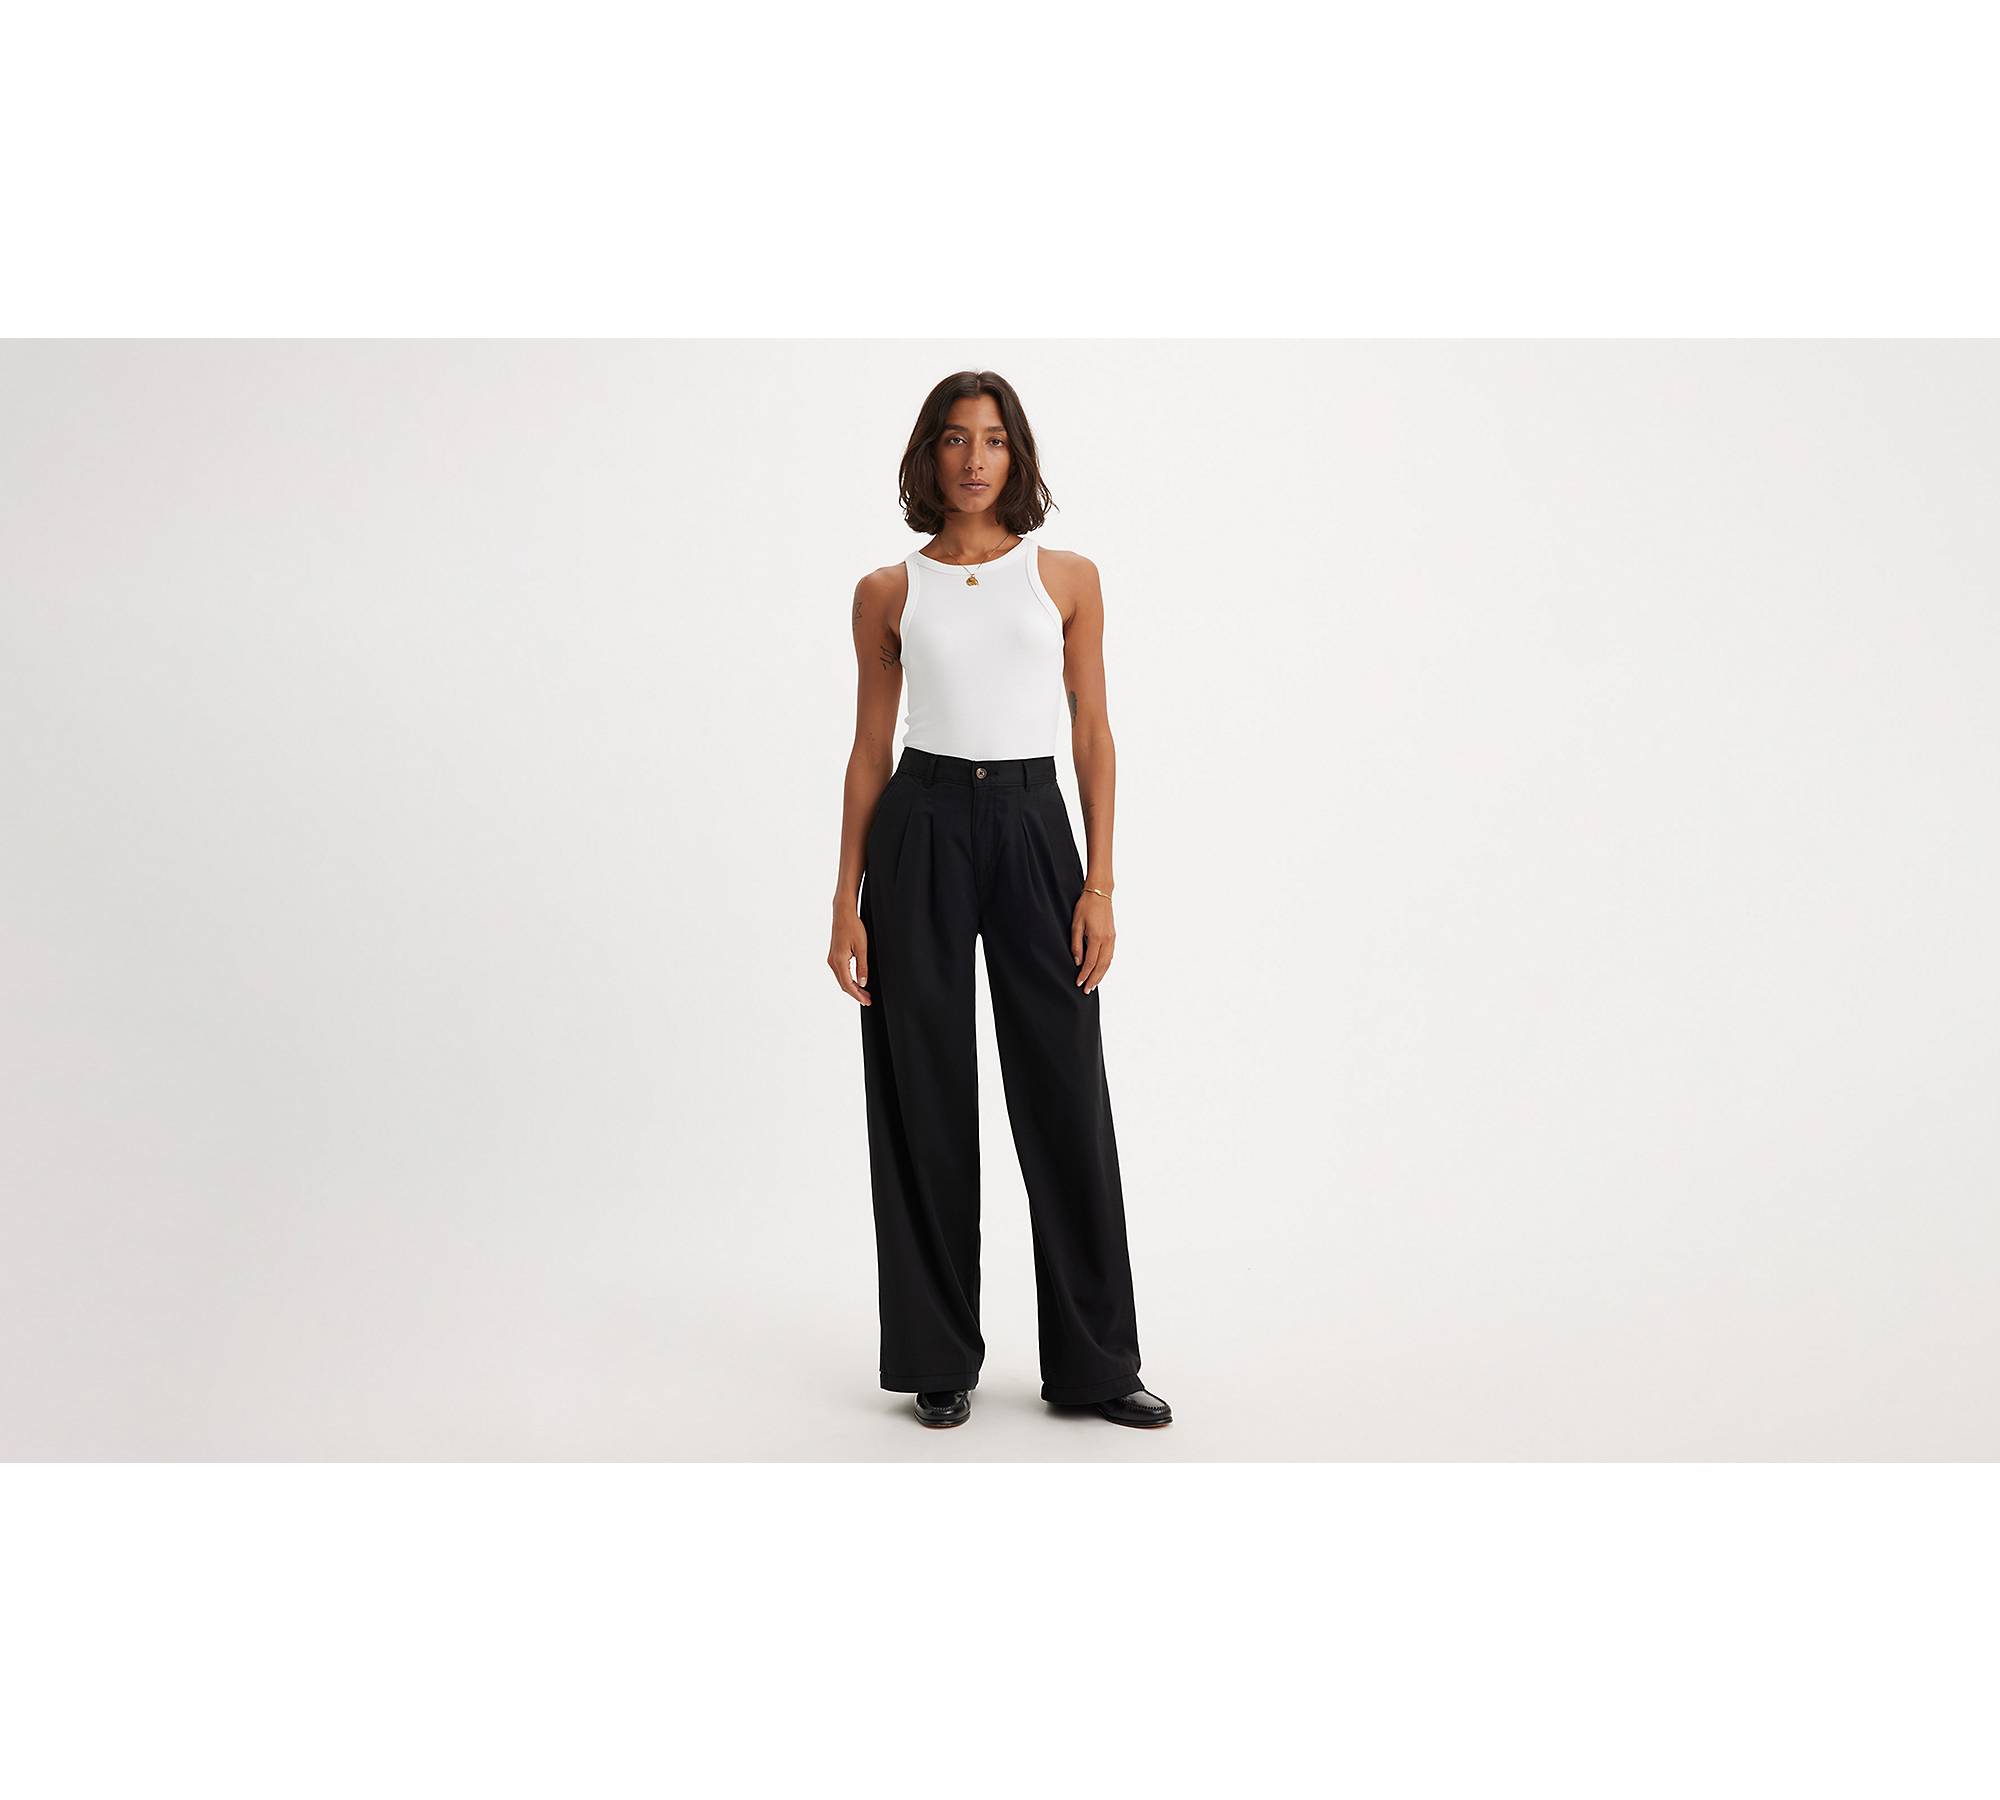 Women's High-Rise Pleat Front Tapered Chino Pants - A New Day Black 16